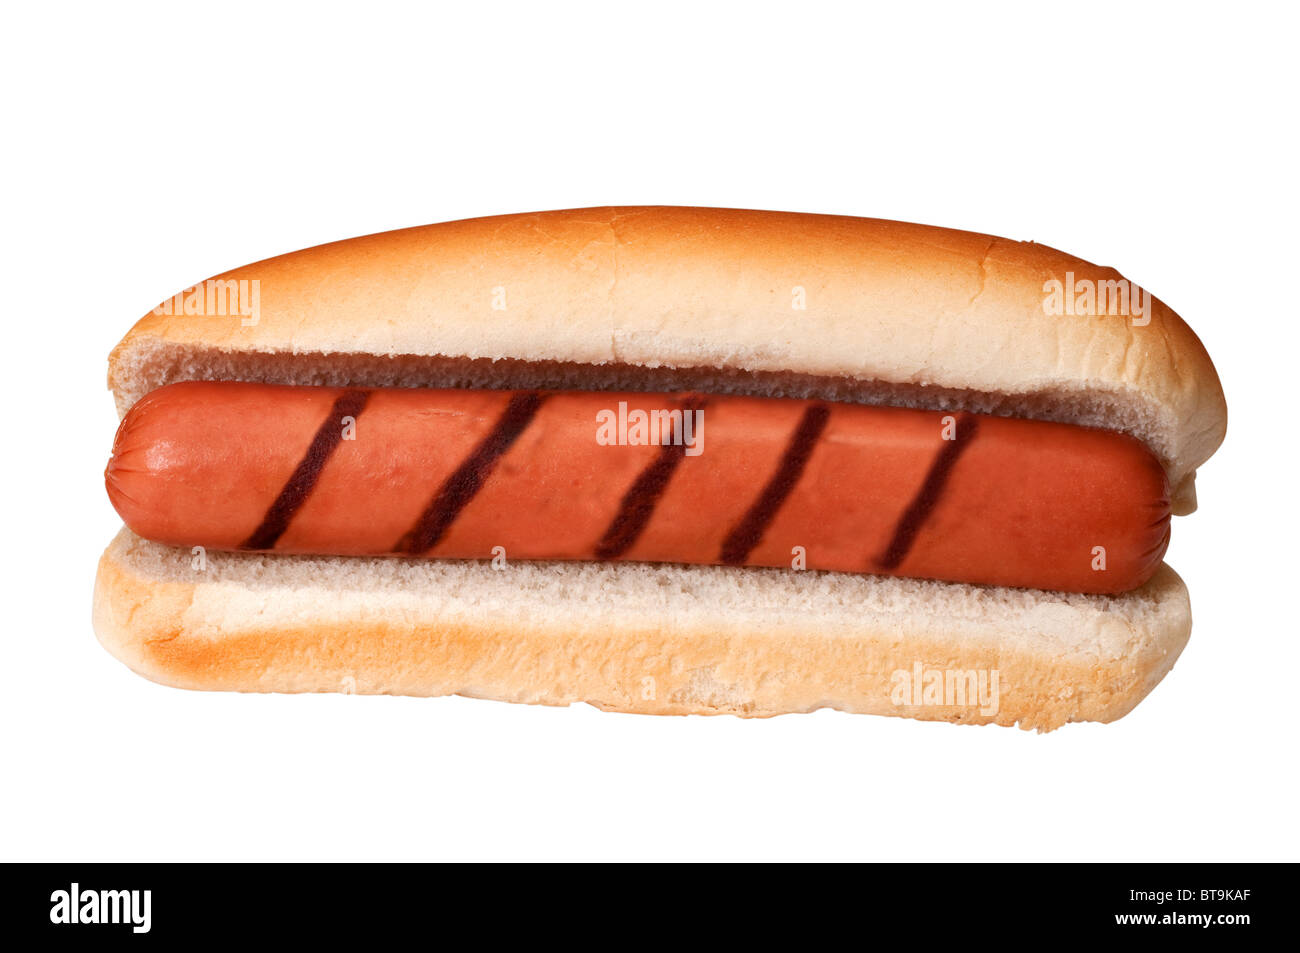 Plain hot dog with grill marks isolated on white background with clipping path. Stock Photo